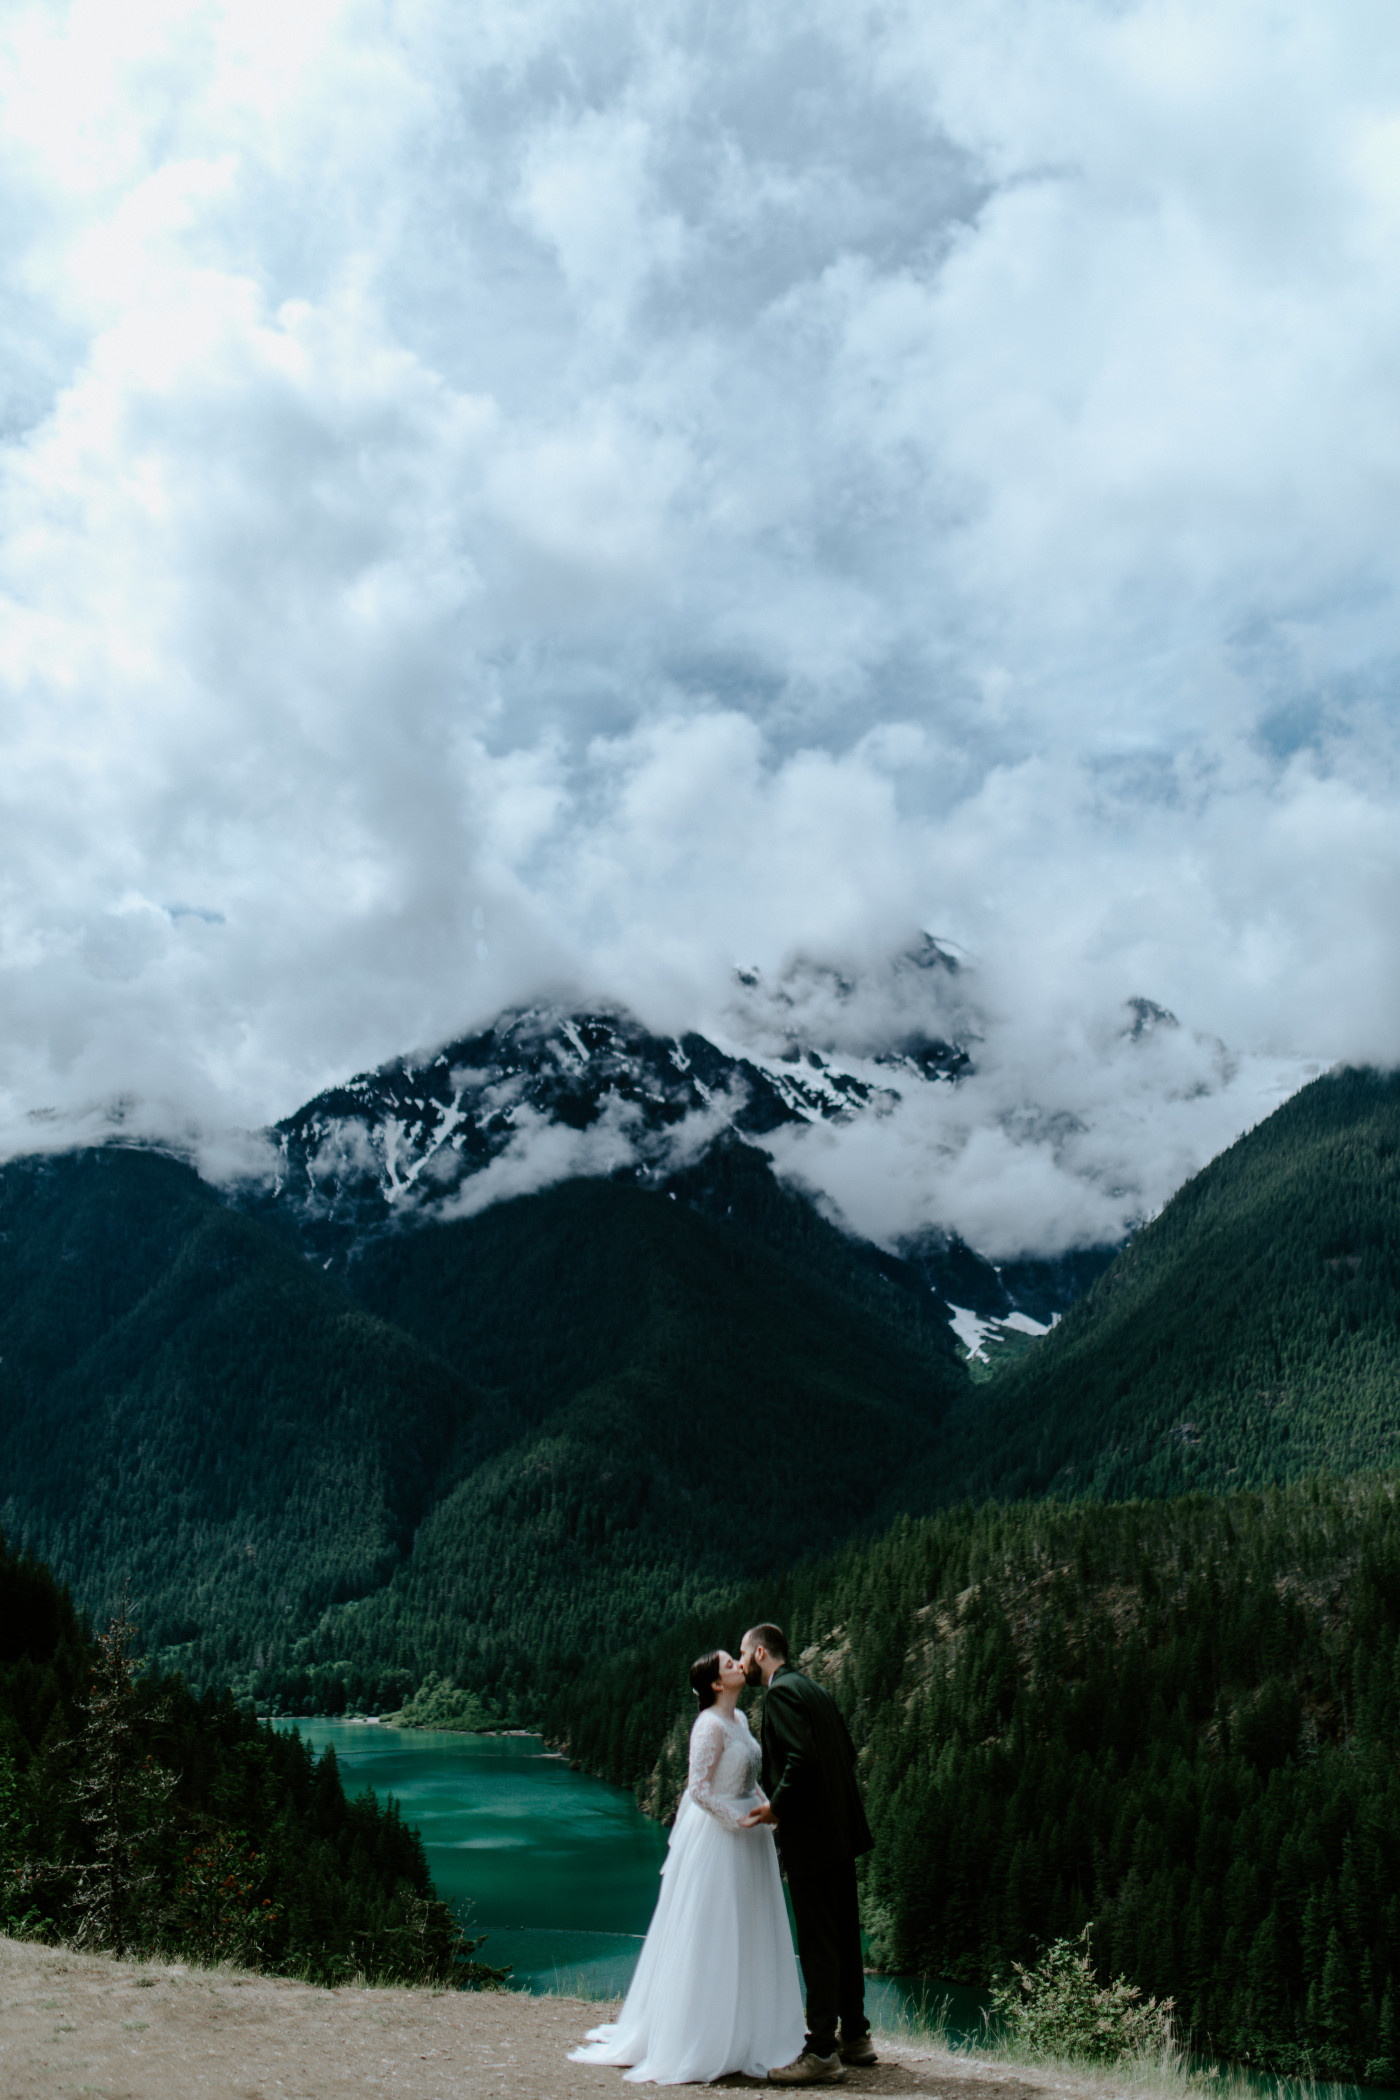 Elizabeth and Alex kiss. Elopement photography at North Cascades National Park by Sienna Plus Josh.